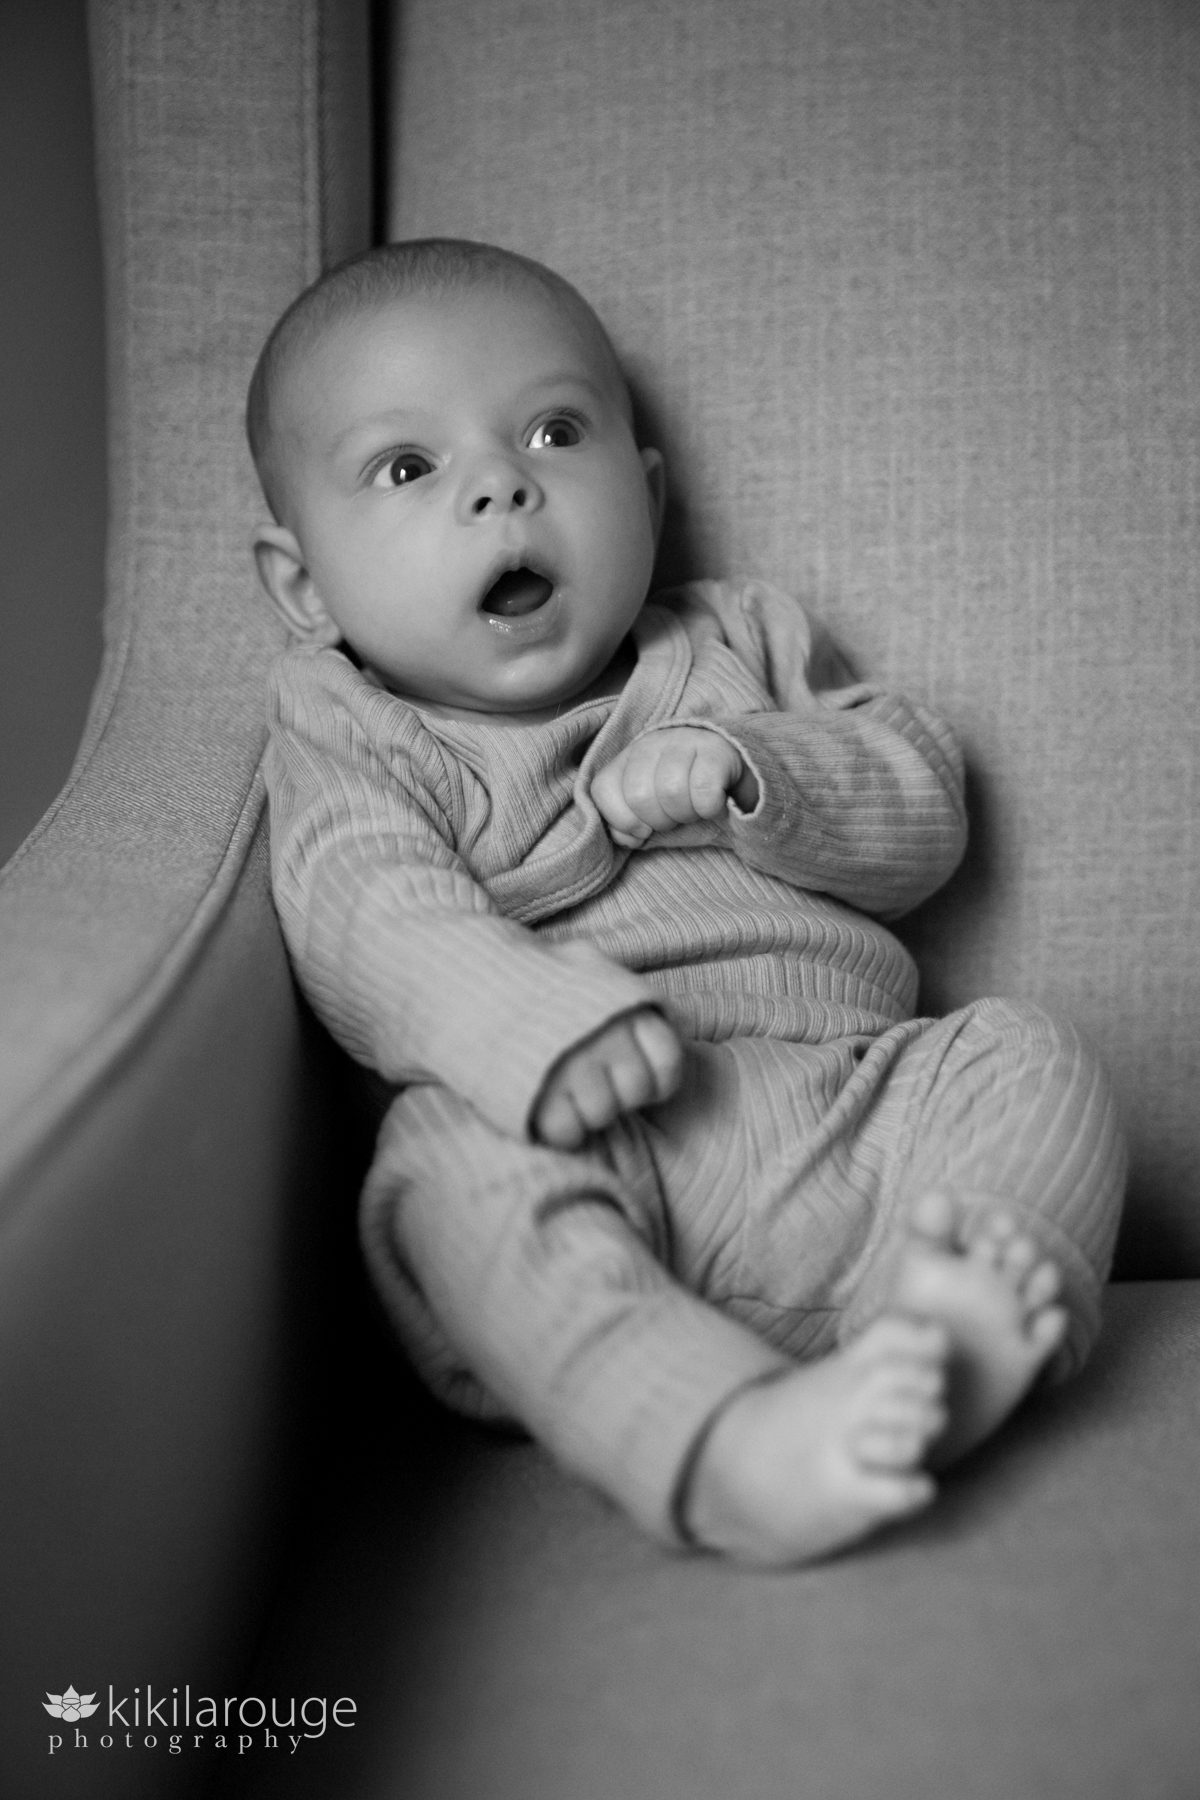 Baby with wow expression sitting upright in gray chair